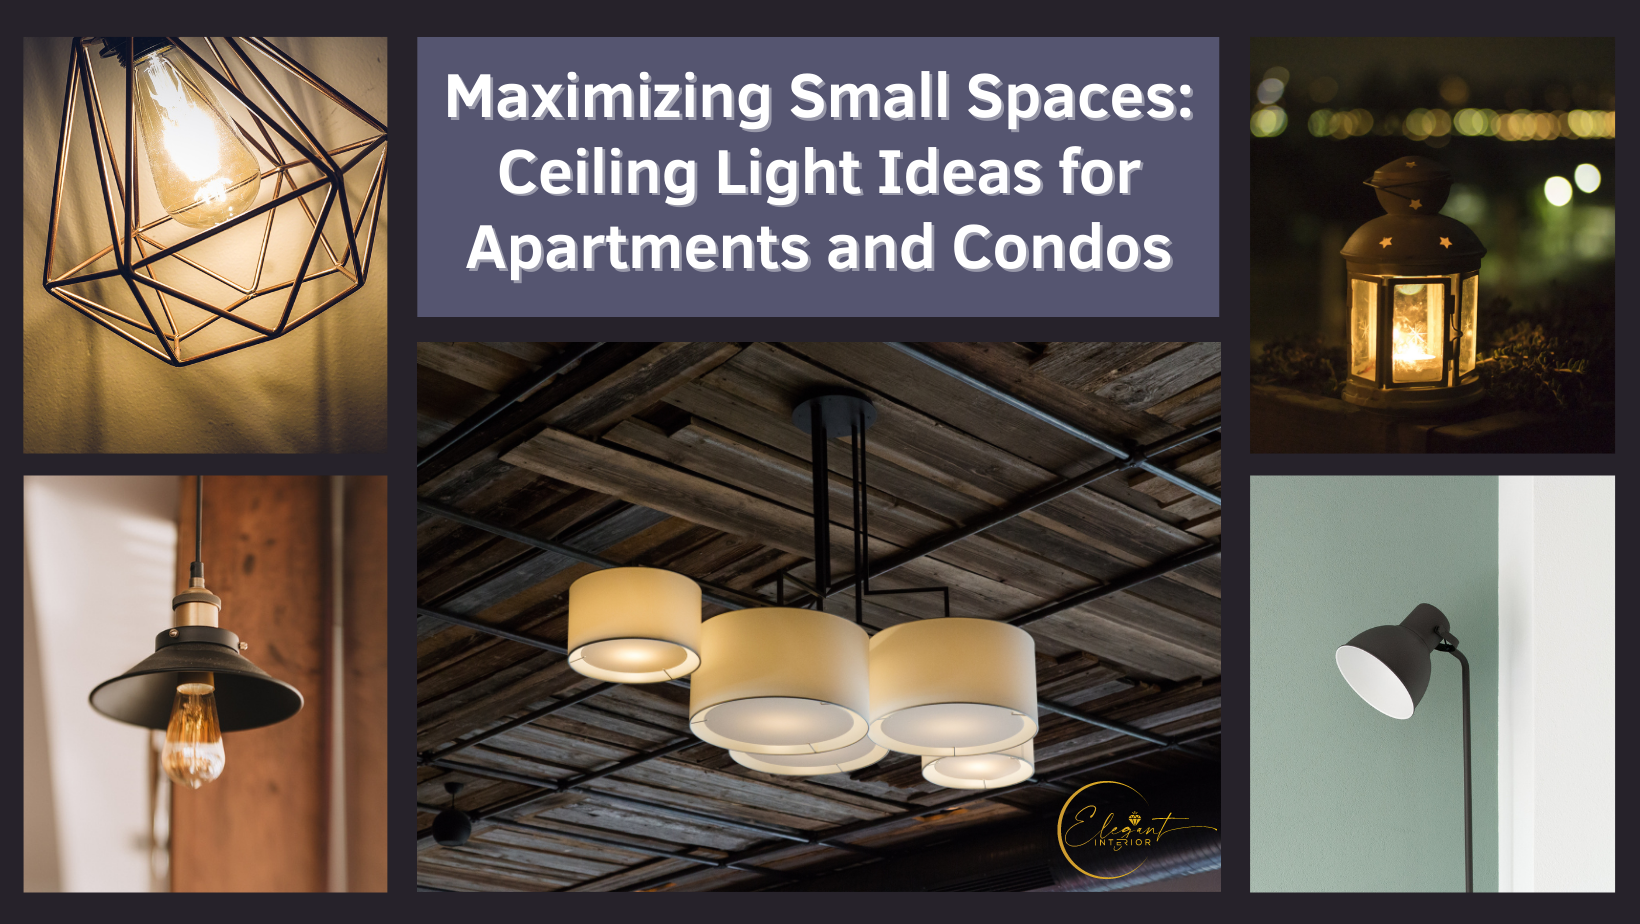 Maximizing Small Spaces: Ceiling Light Ideas for Apartments and Condos